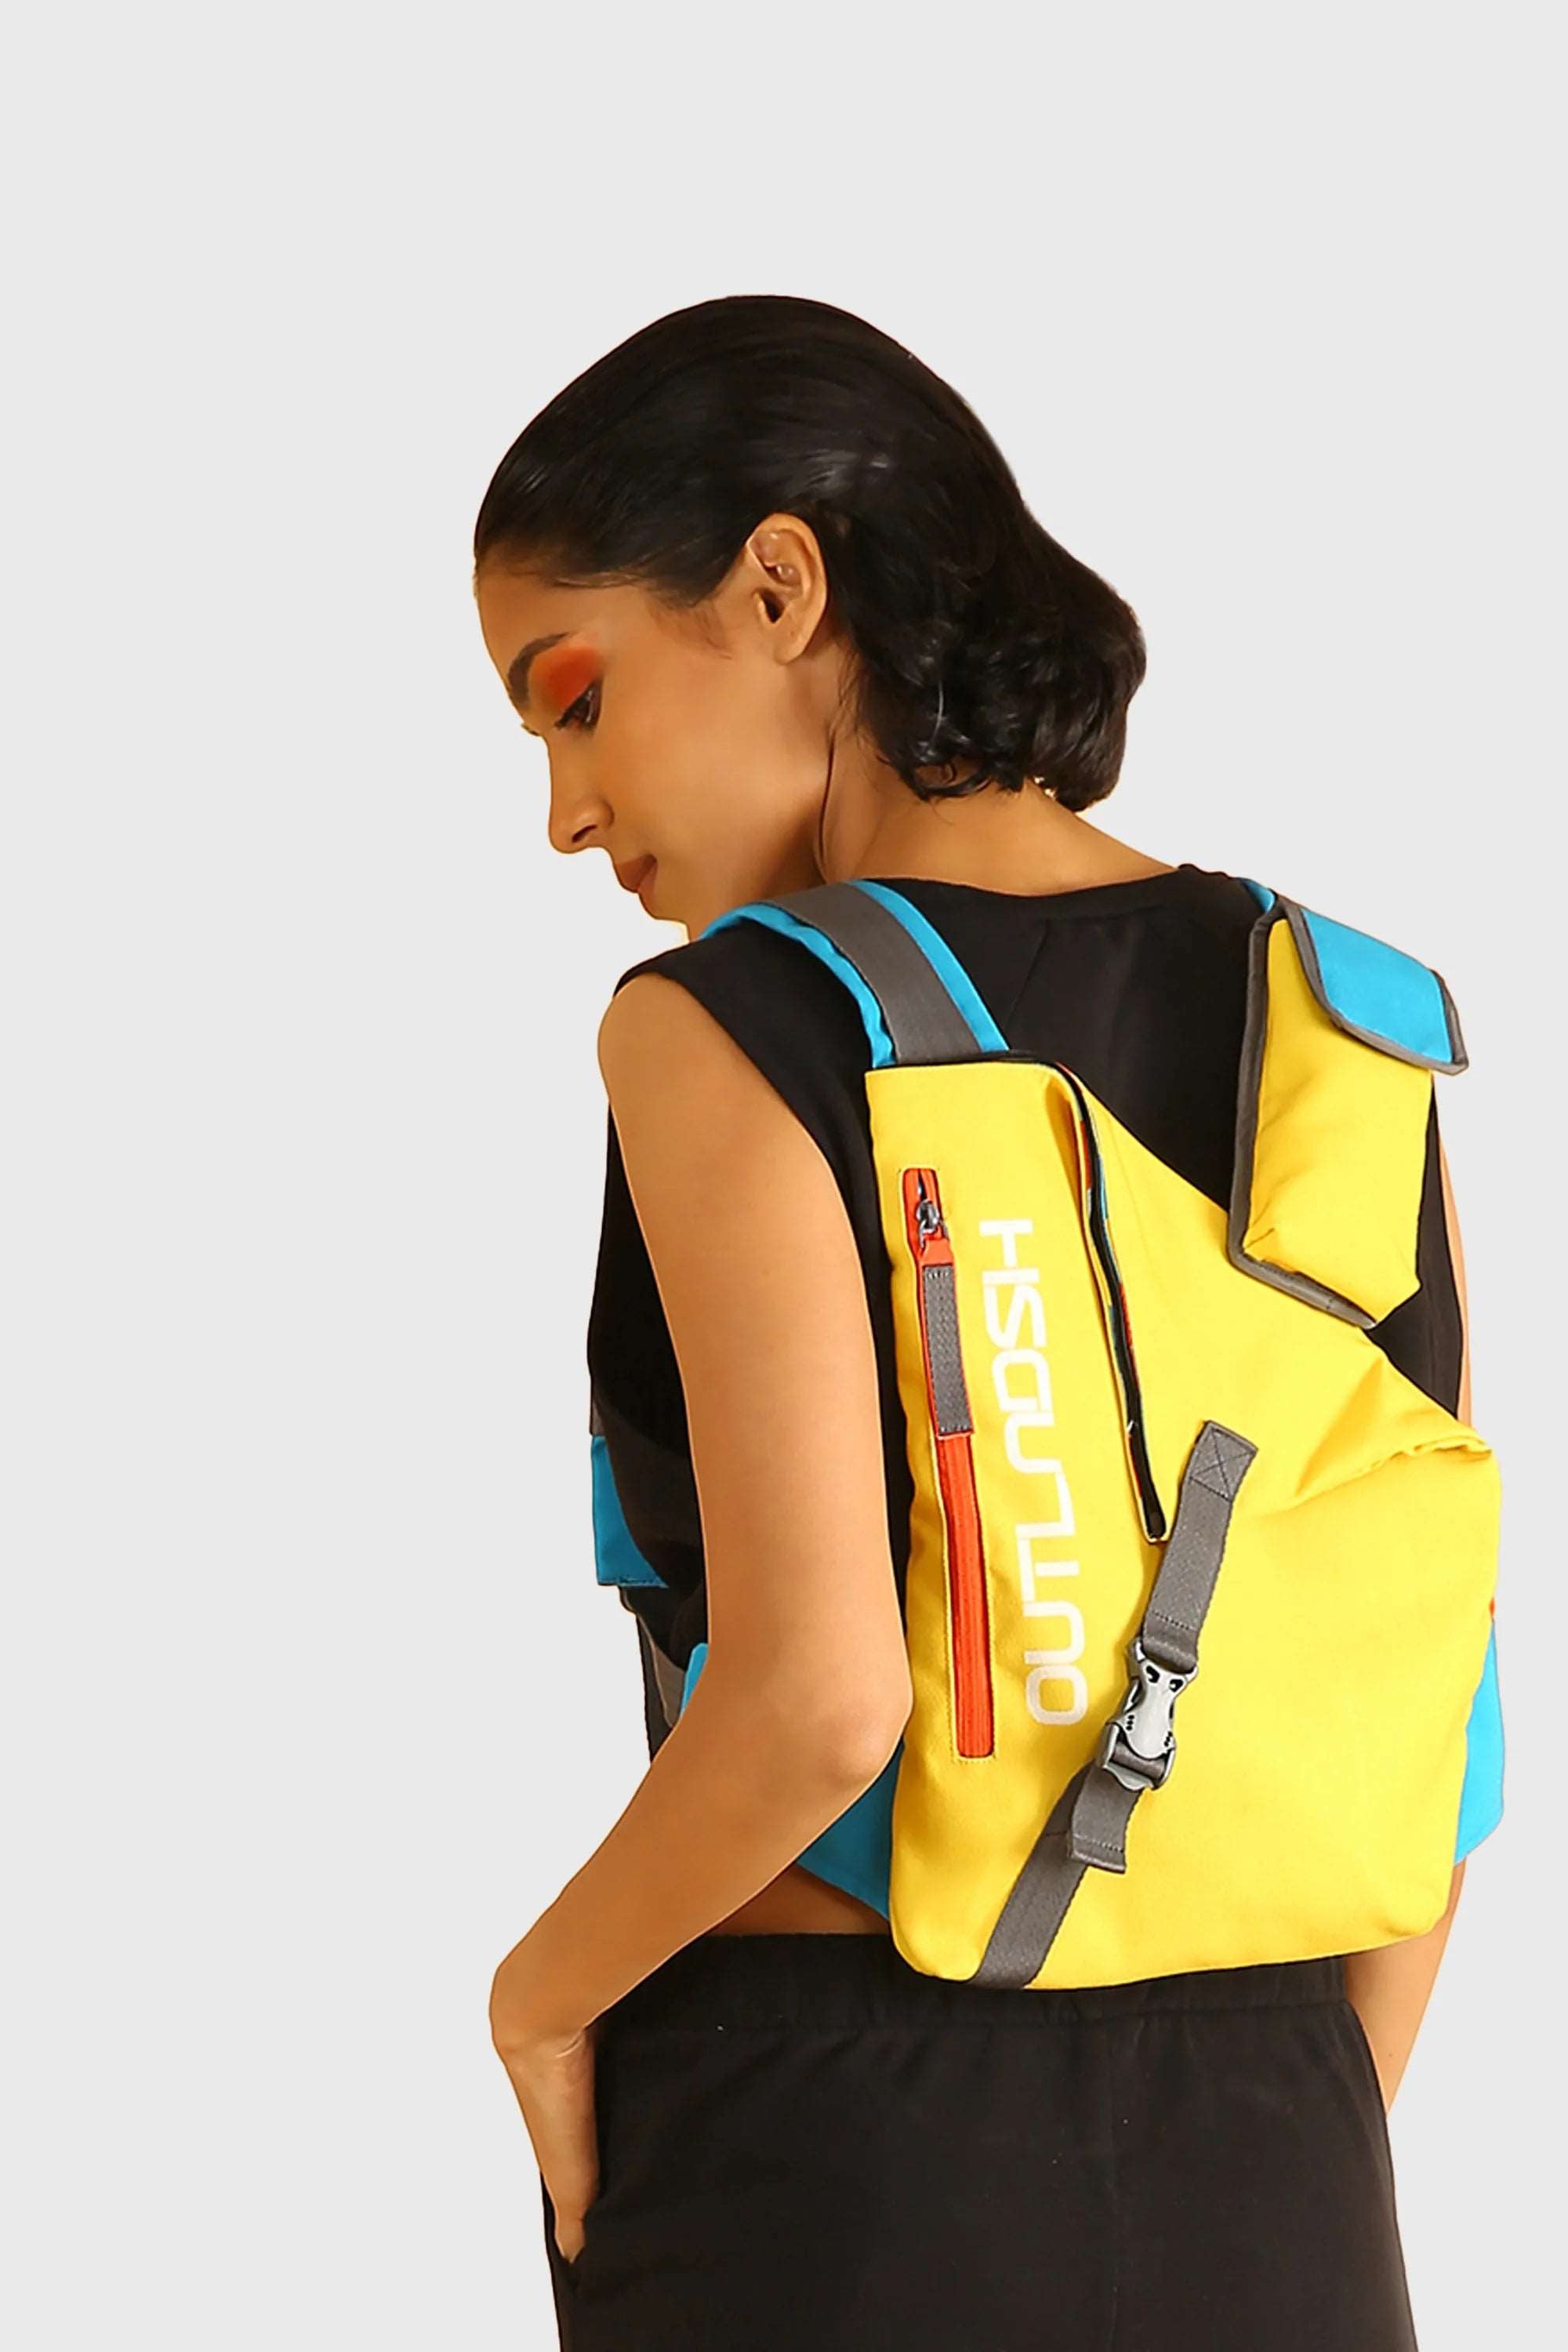 OUTLNDSH Backpack bag plus chest bag yellow color 